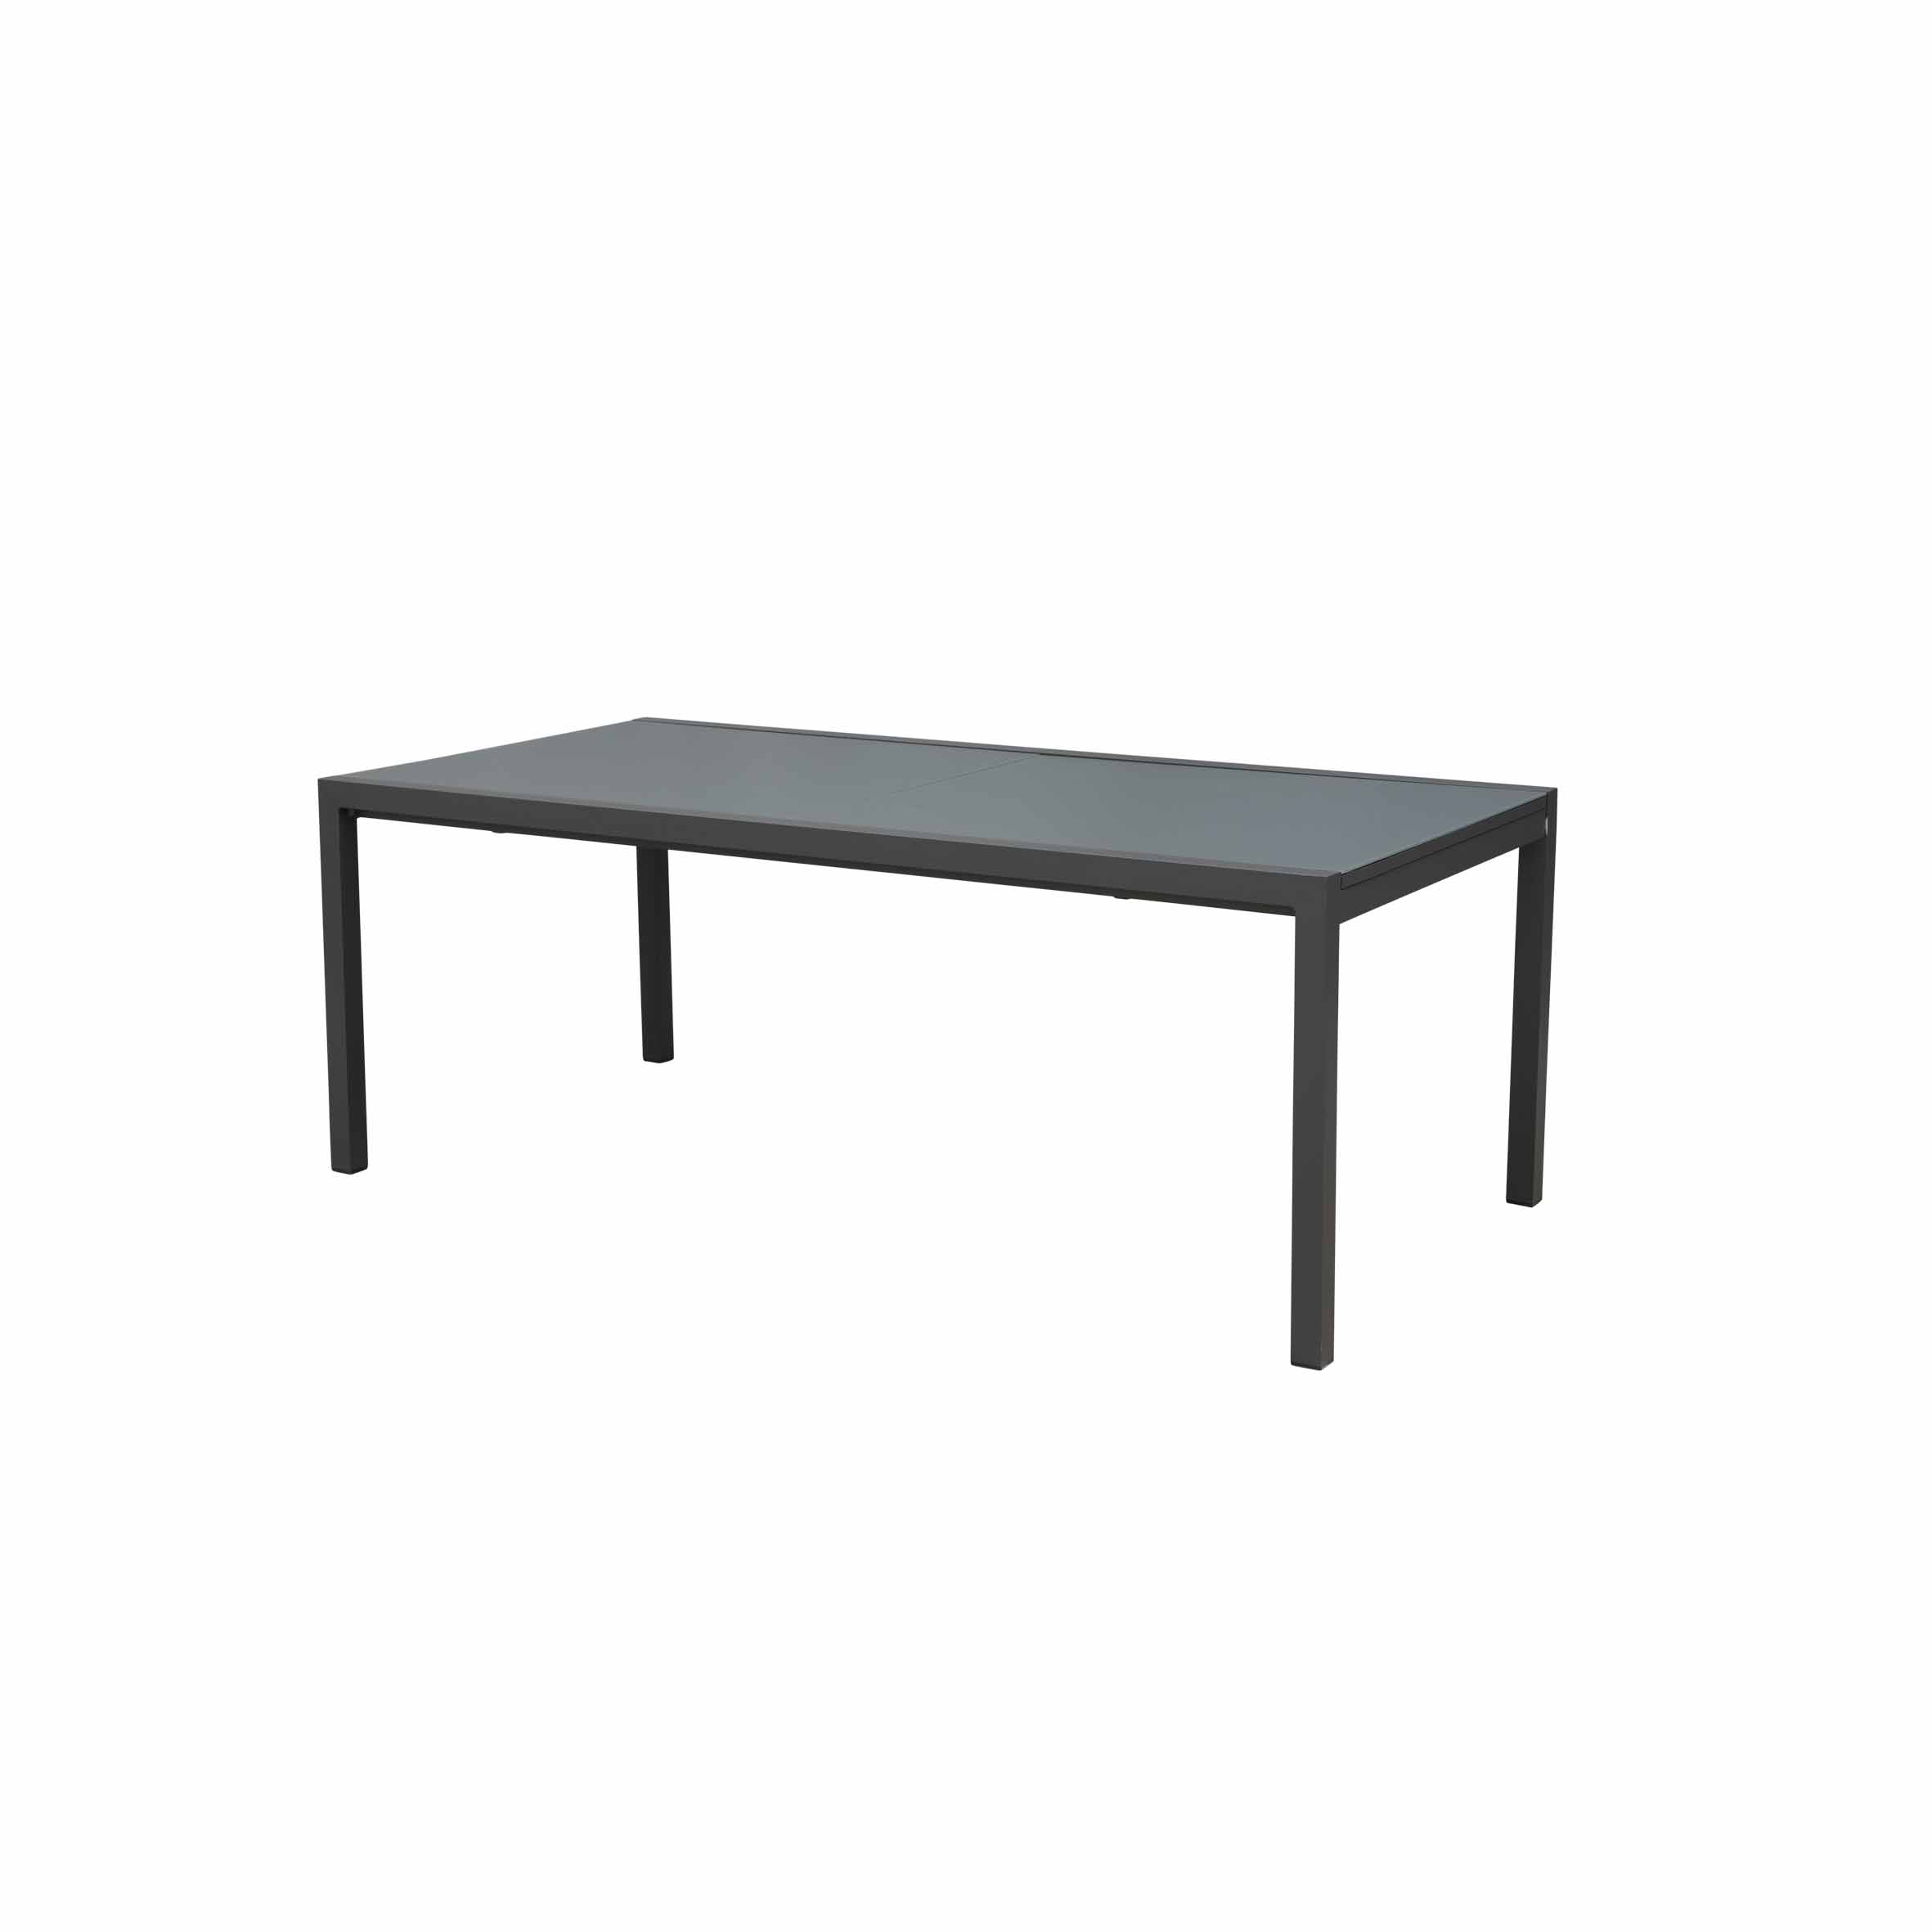 Kotka extension table S3